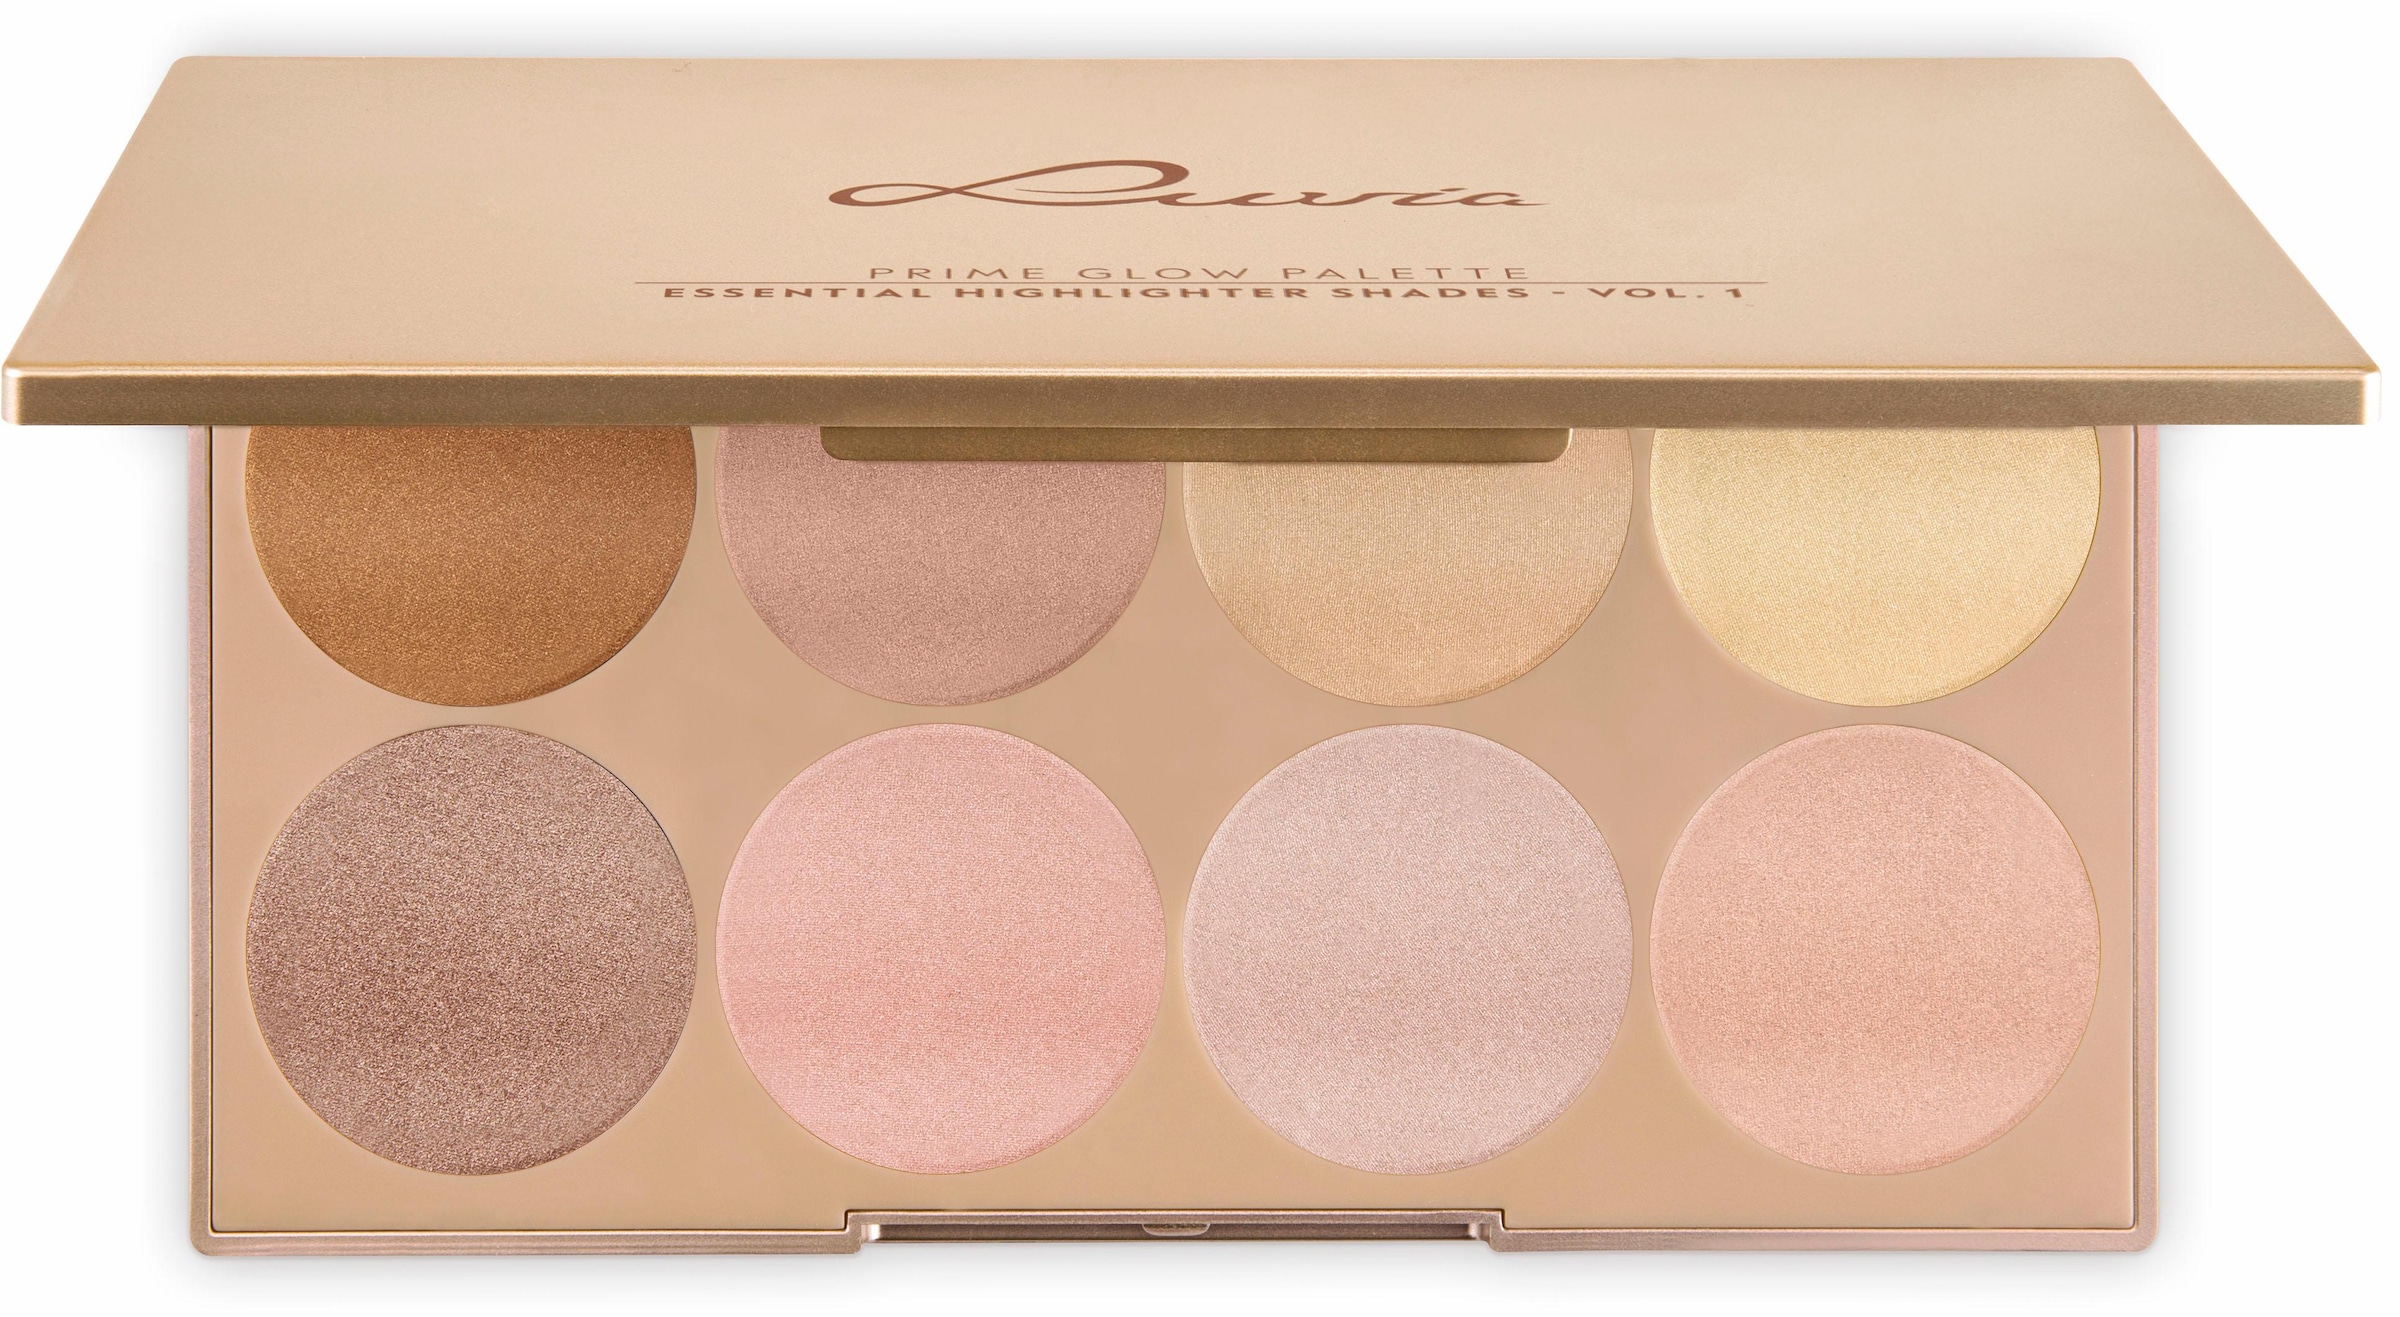 Highlighter-Palette »Prime Glow - Essential Contouring Shades Vol. 1«, (8 tlg.), 8 Farben